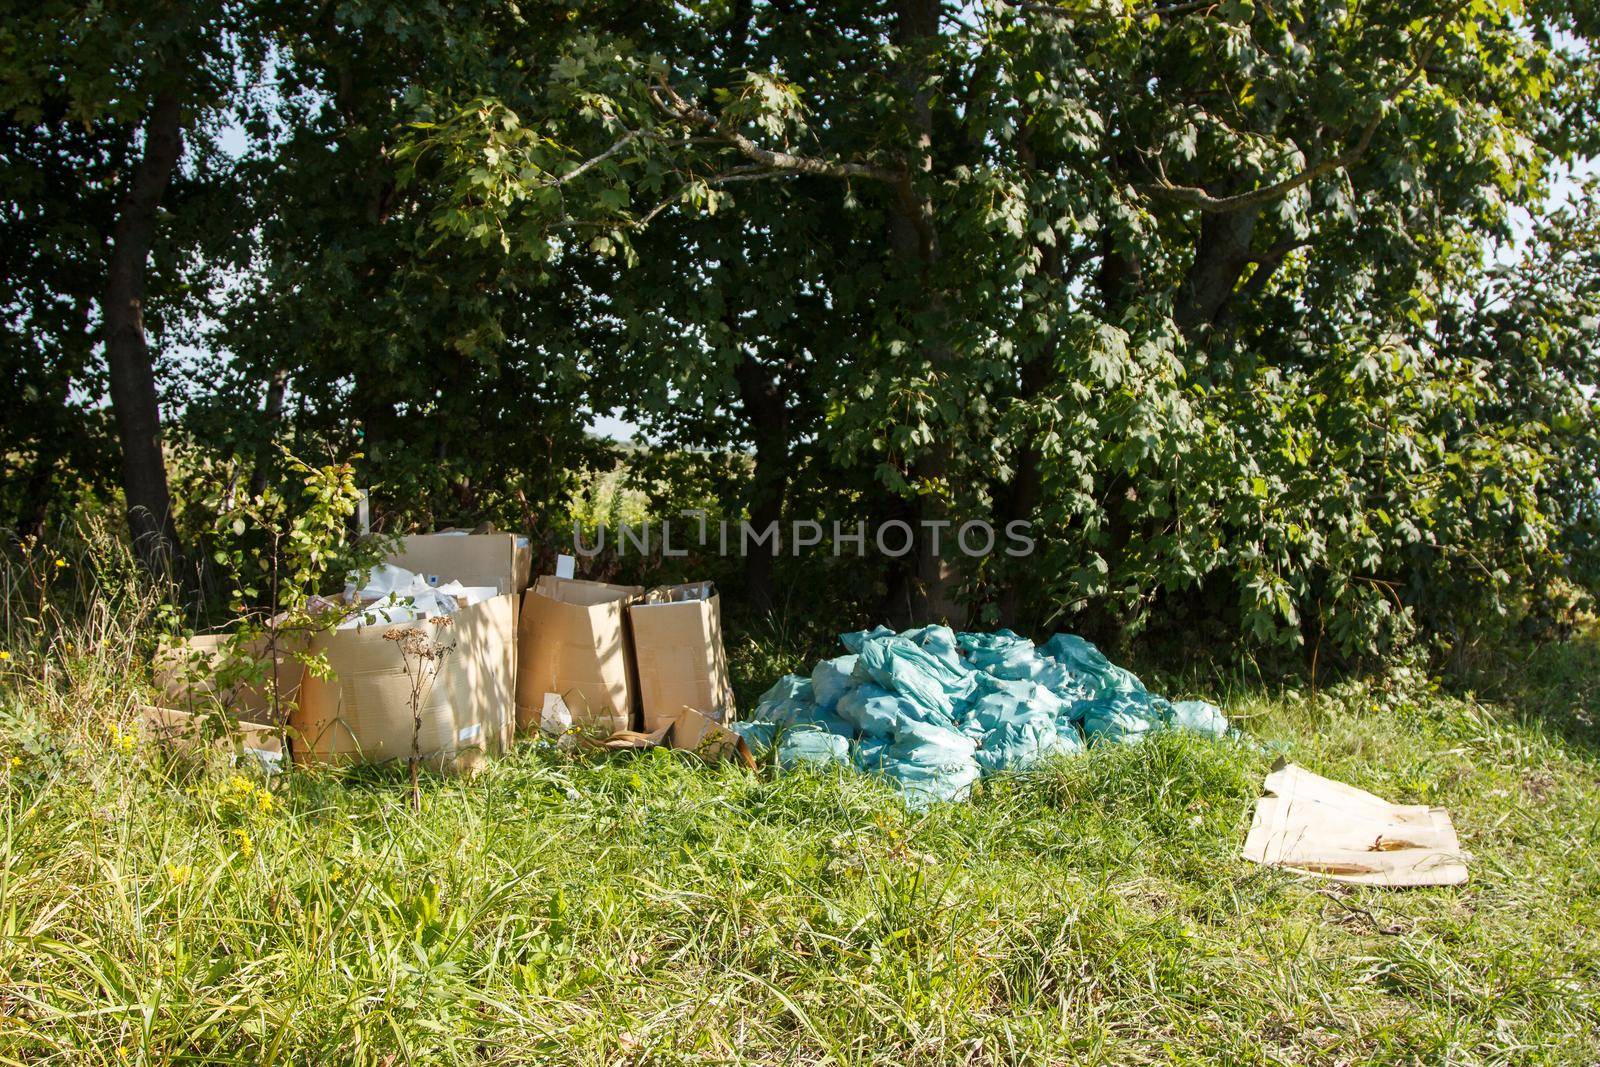 unauthorized garbage dump in the forest on sunny autumn day